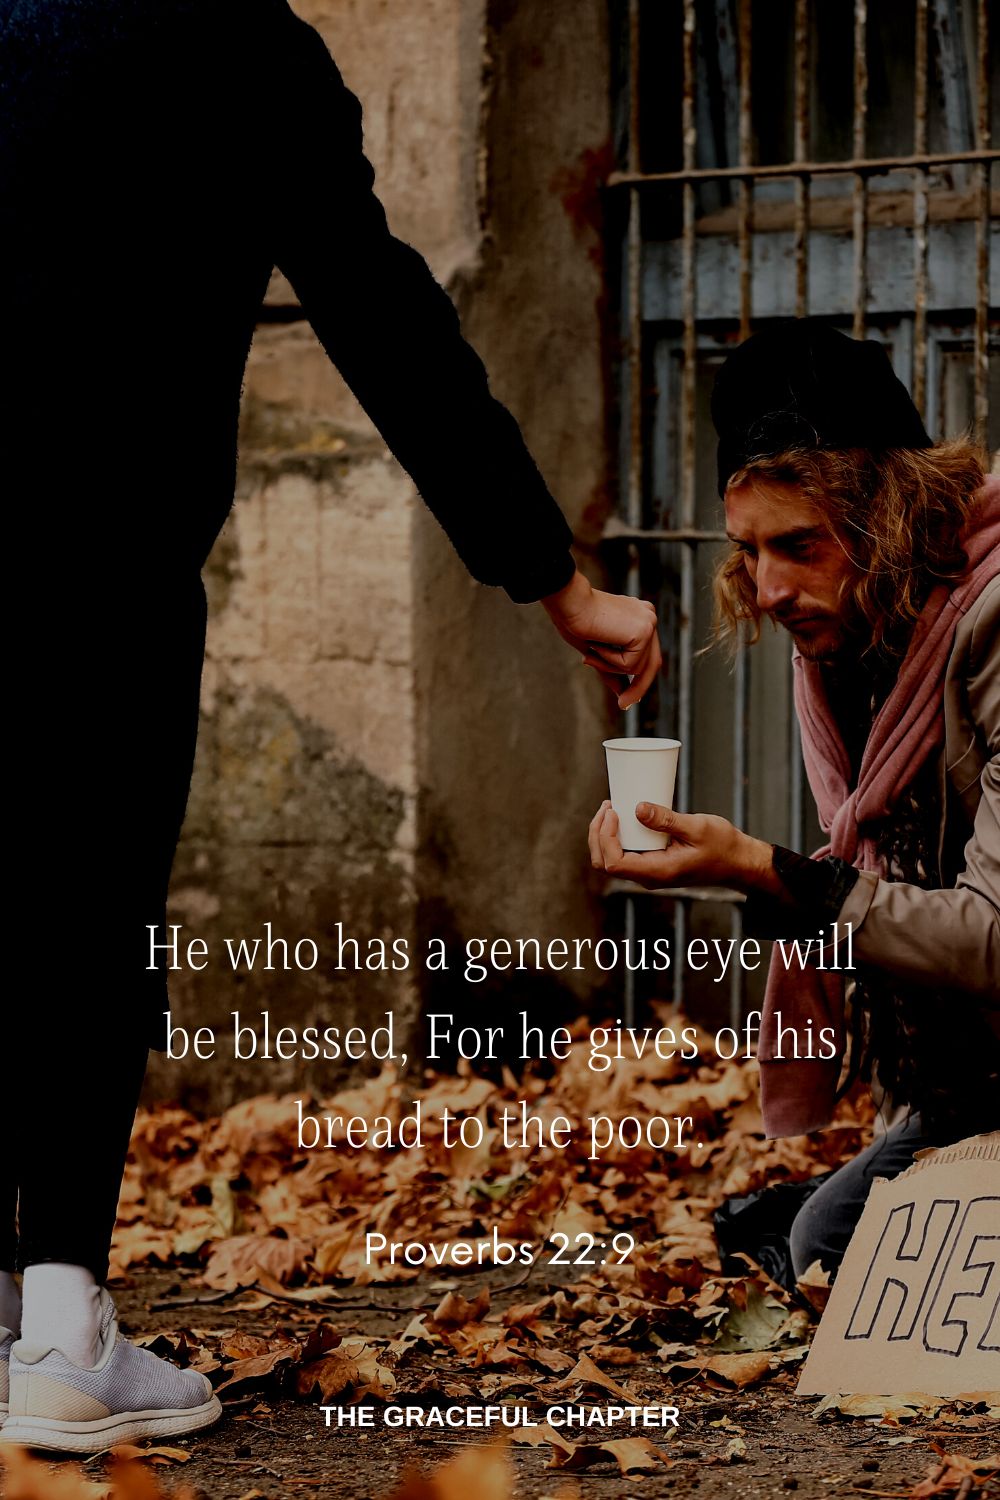 He who has a generous eye will be blessed, For he gives of his bread to the poor. Proverbs 22:9